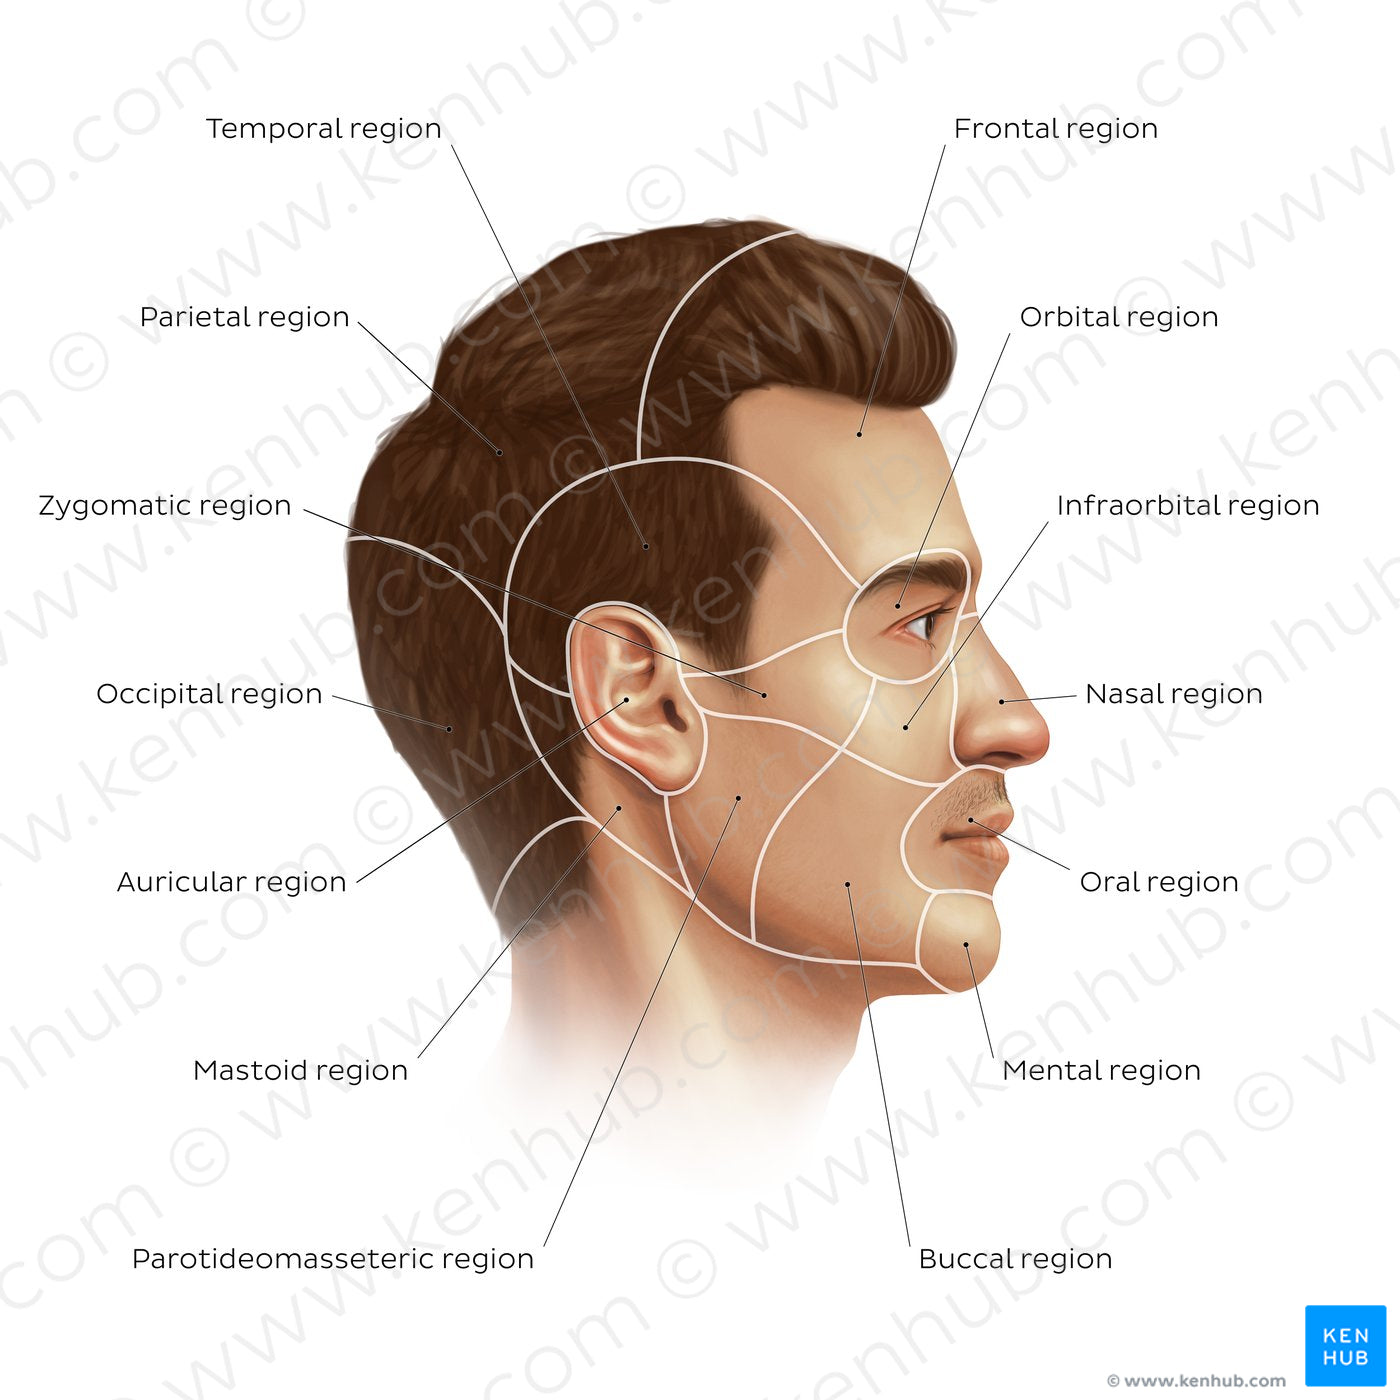 Regions of the head and face (English)